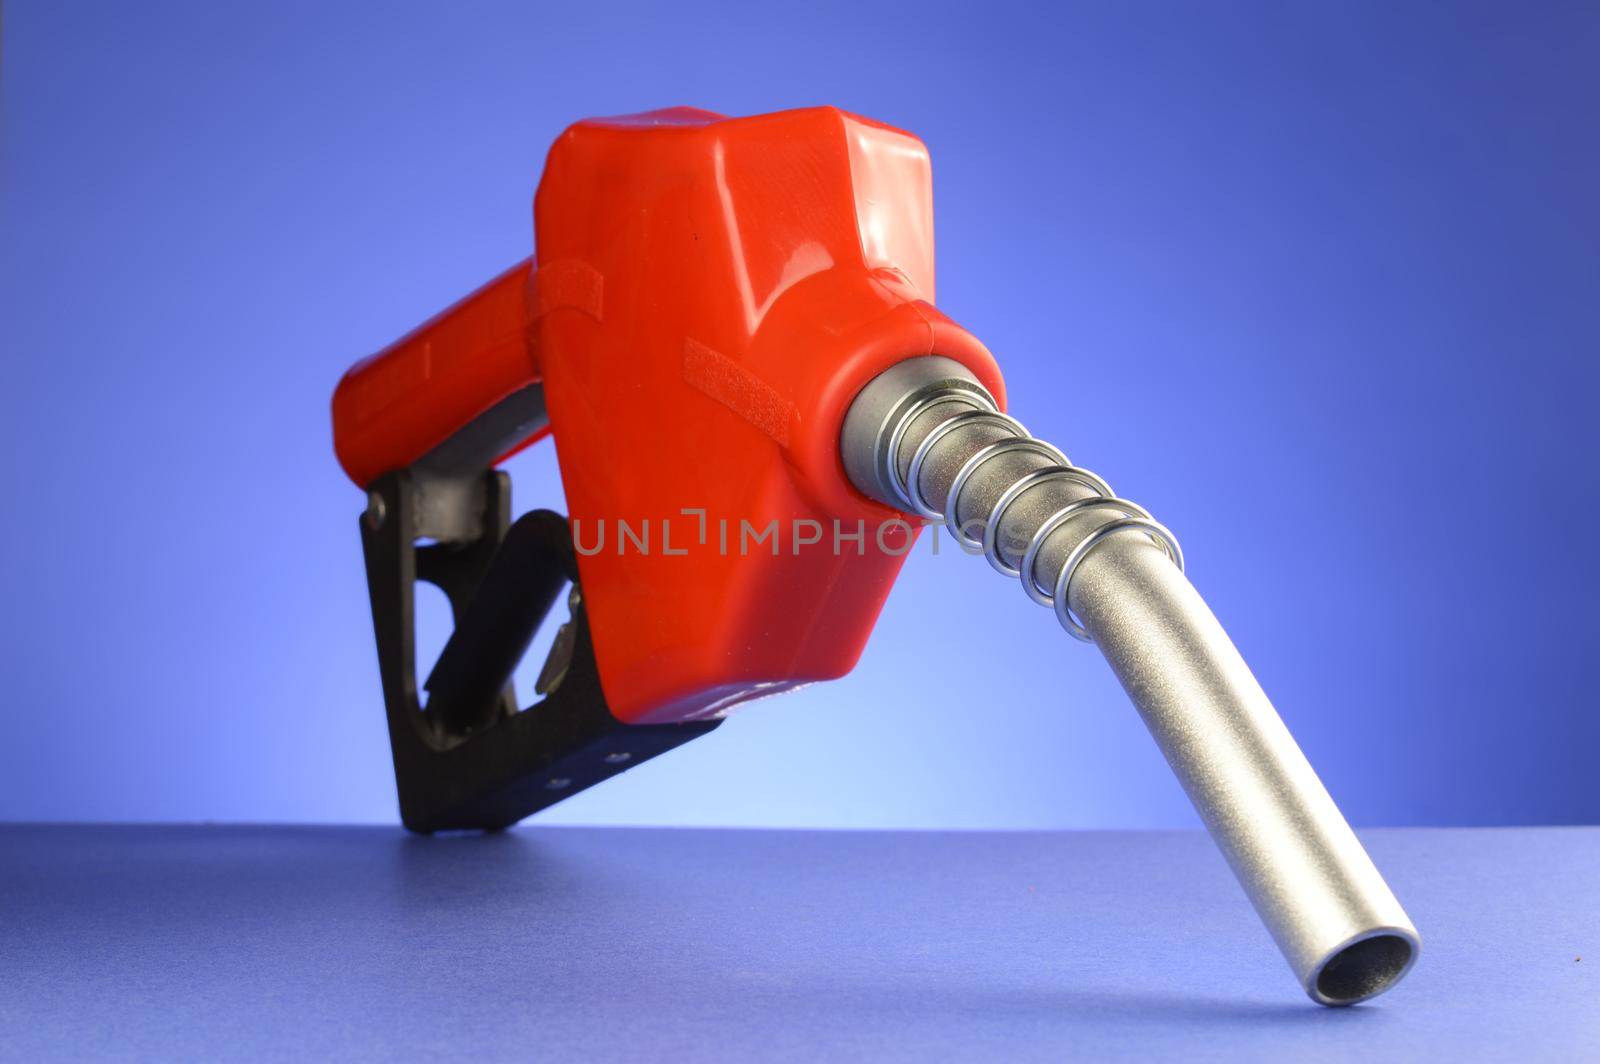 A red gas pump over a blue background.